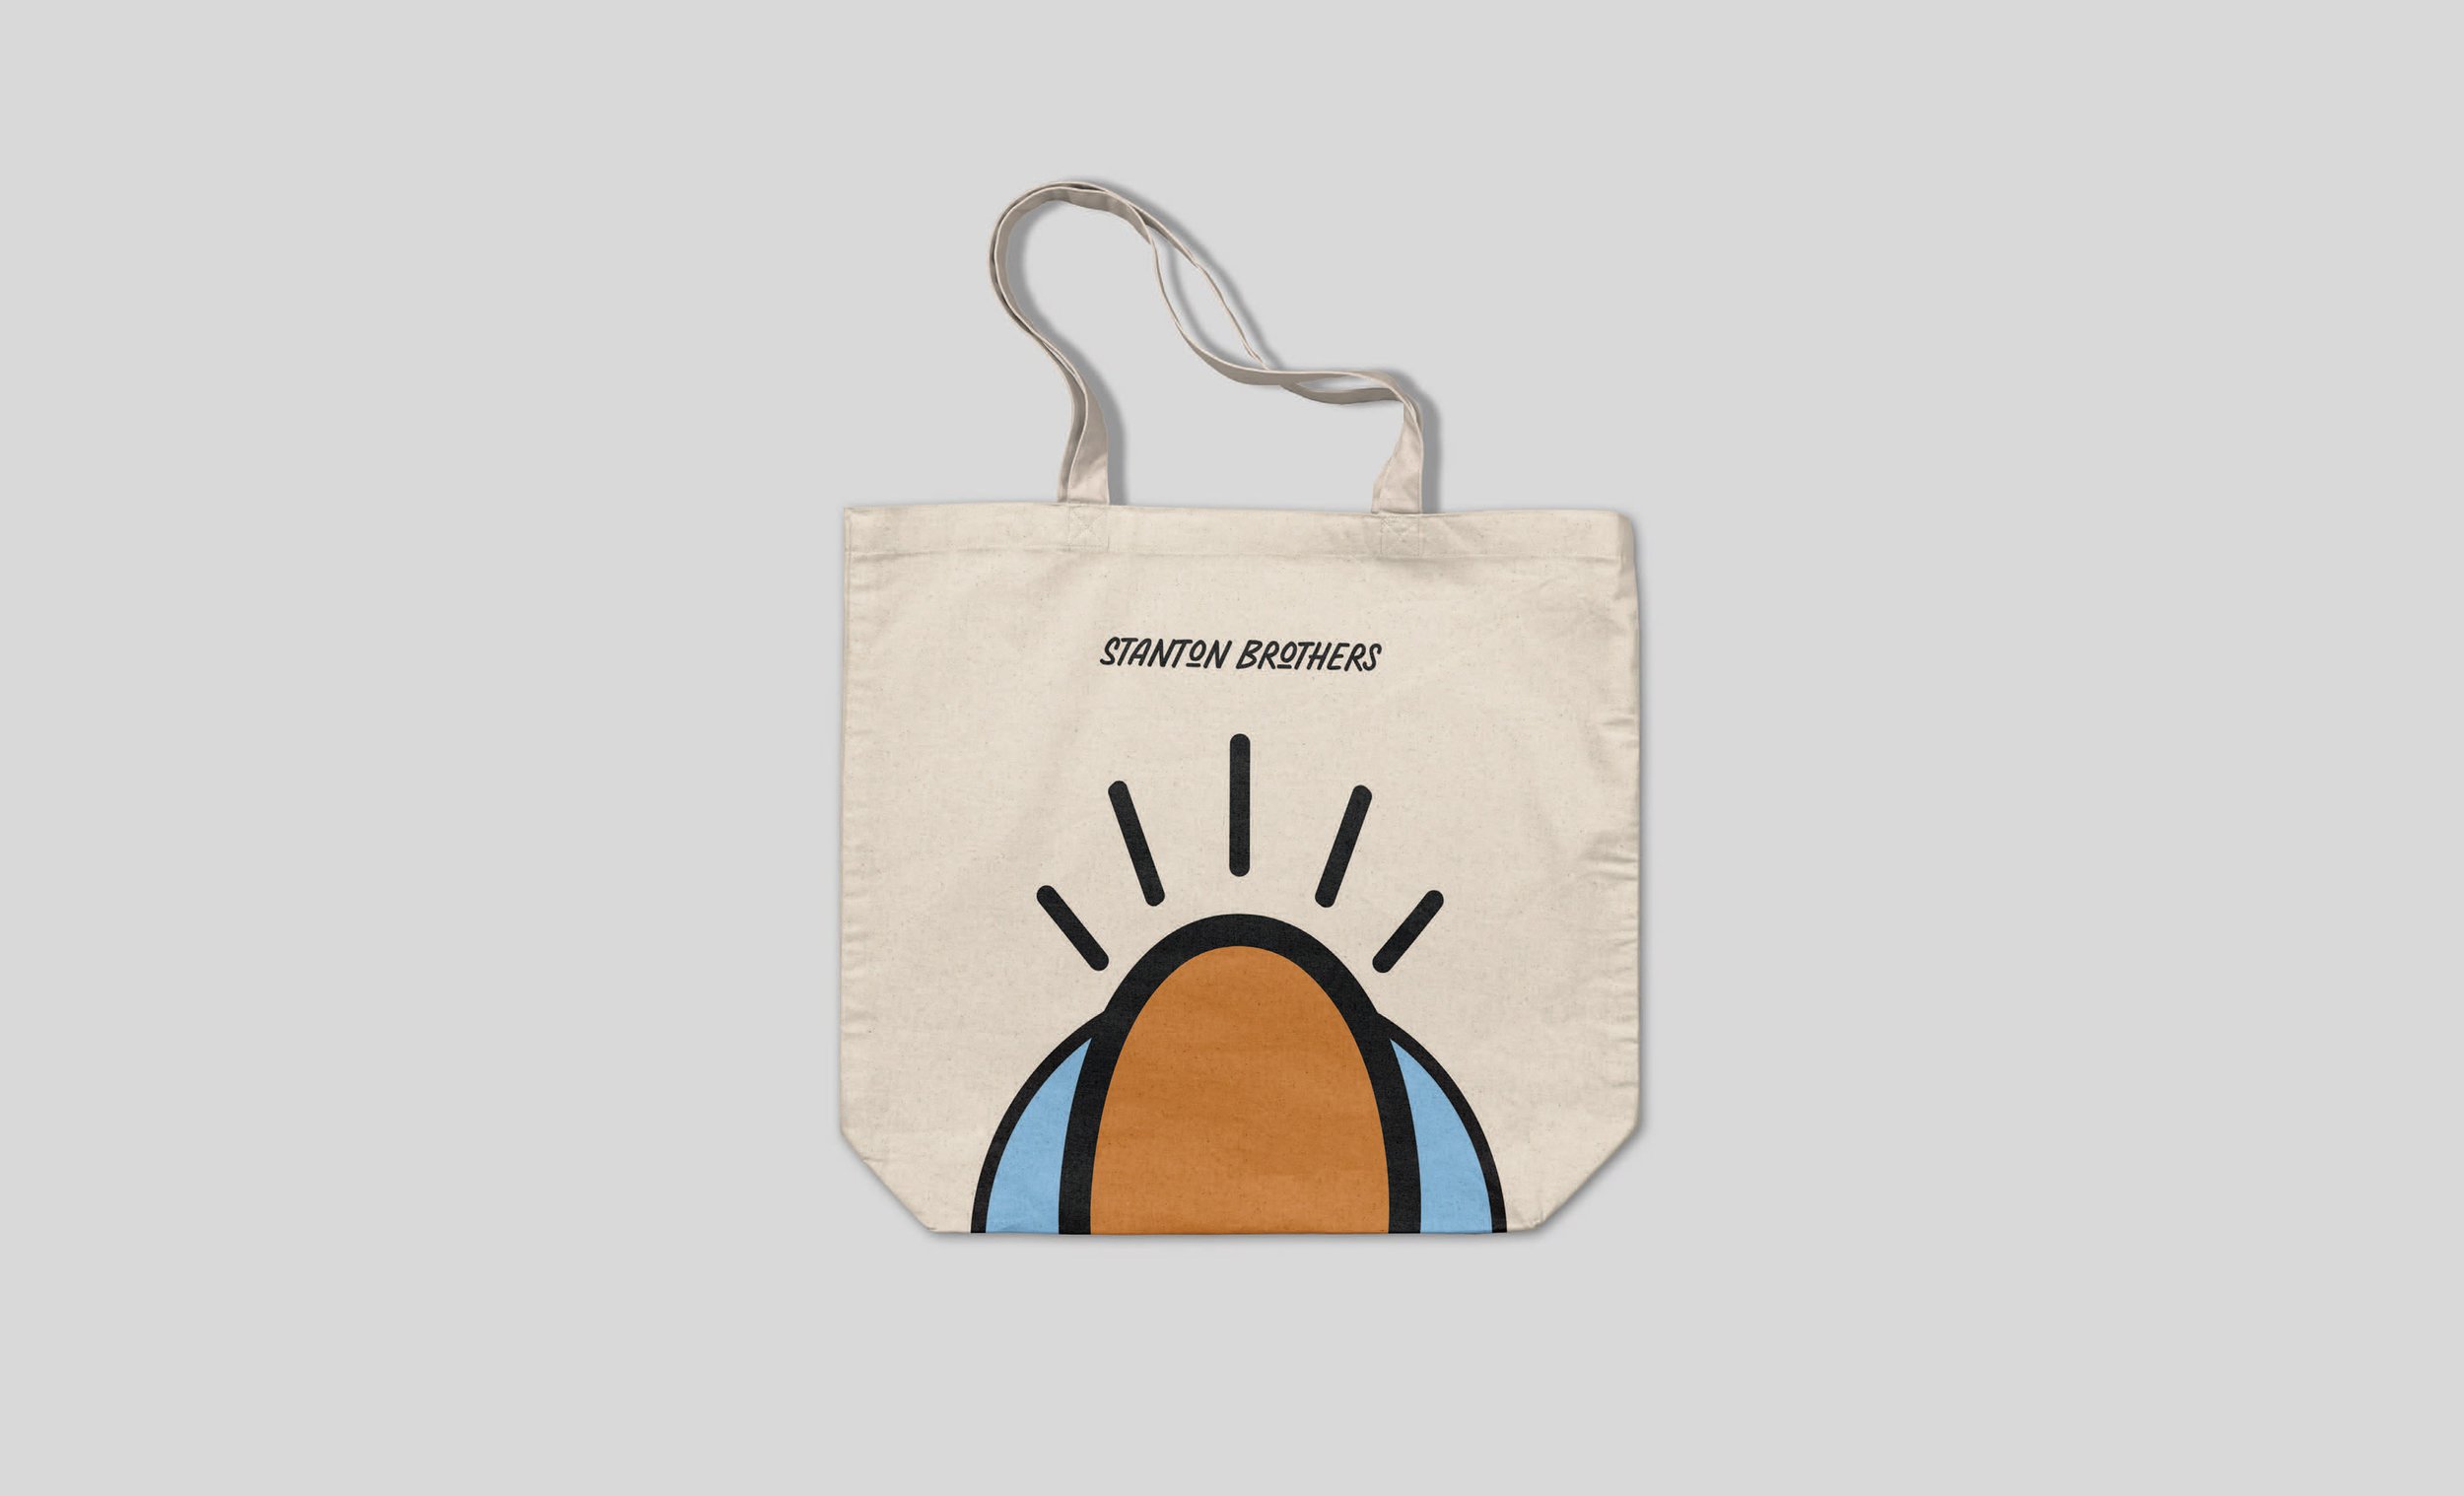  Stanton Brothers logo of an egg on a tote bag. 